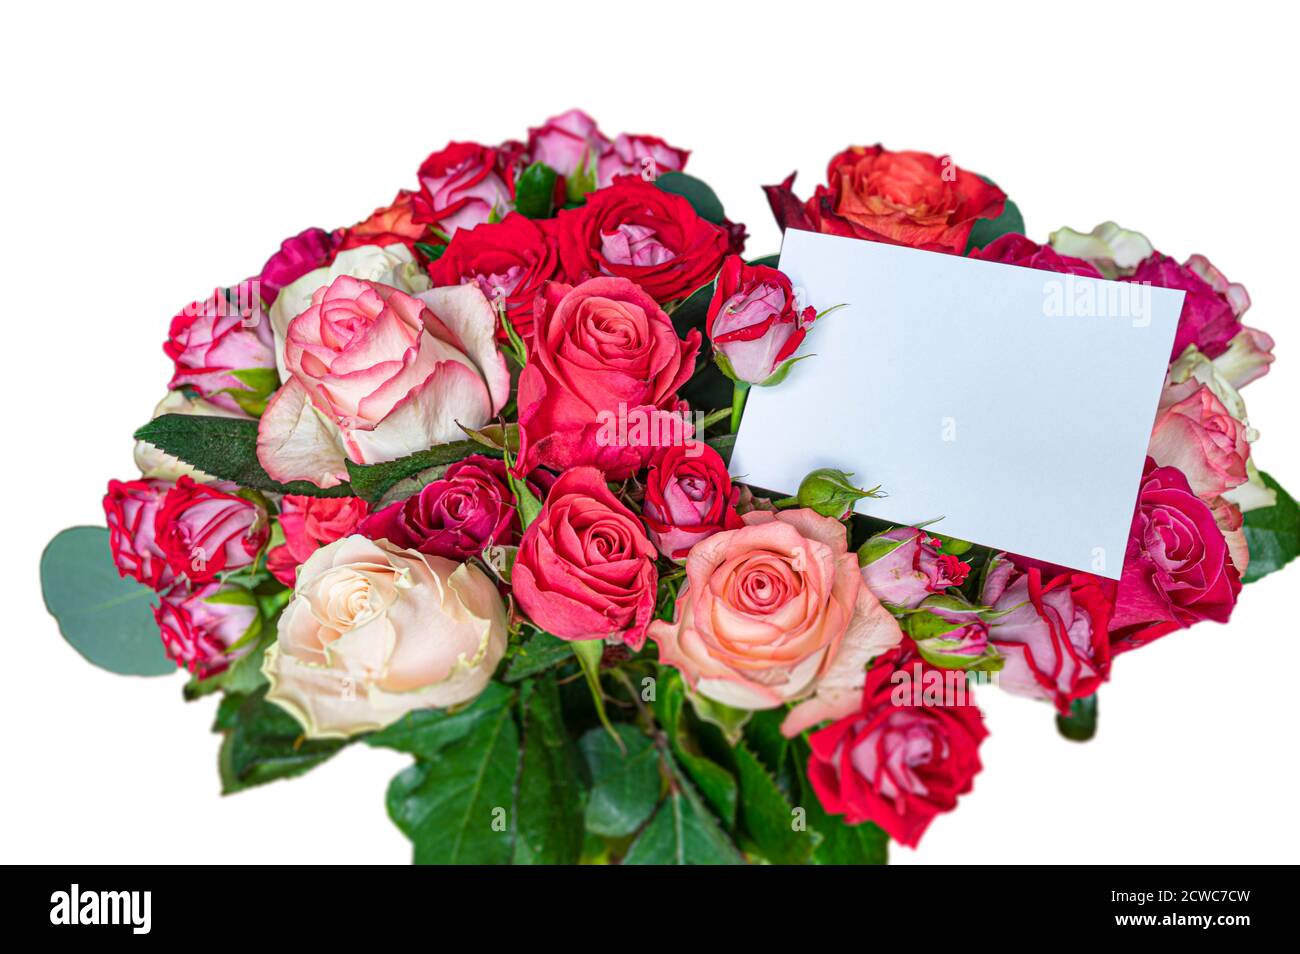 Happy Birthday Card with Bouquet of Pink Roses Stock Photo - Alamy